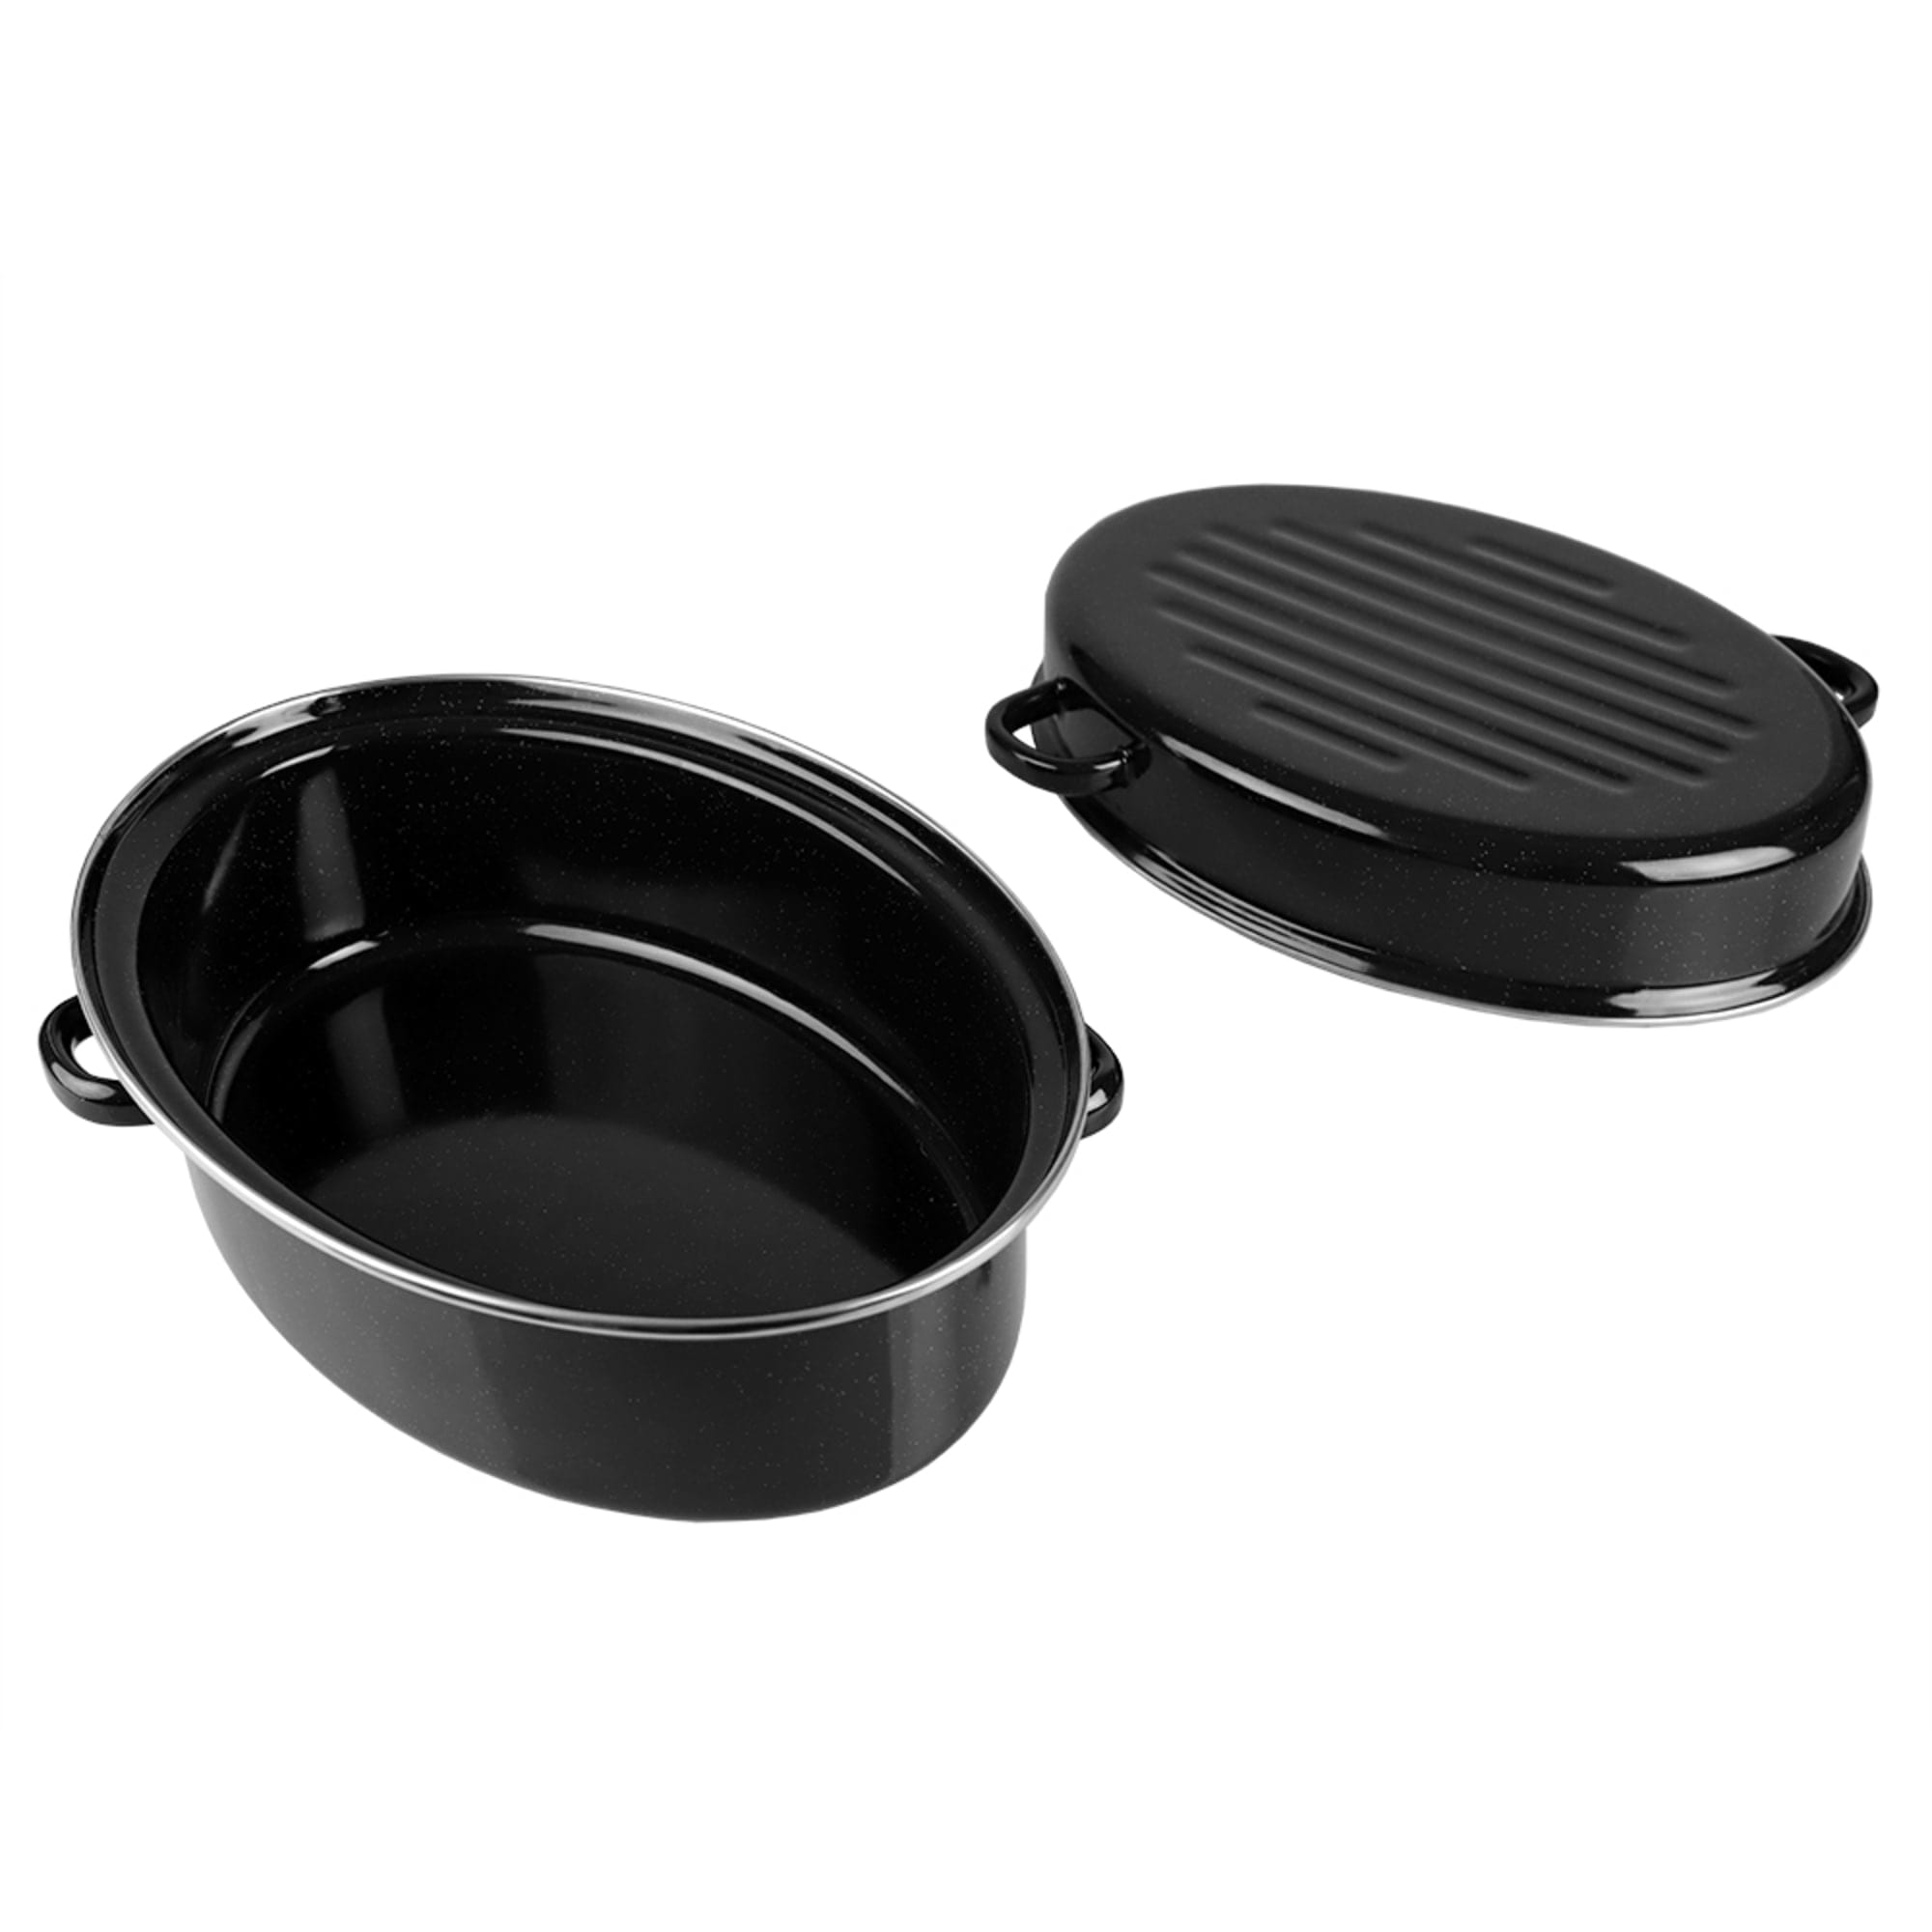 Home Basics Deep Oval Natural Non-Stick 14” Enameled Carbon Steel Roaster Pan with Lid, Black $25.00 EACH, CASE PACK OF 3